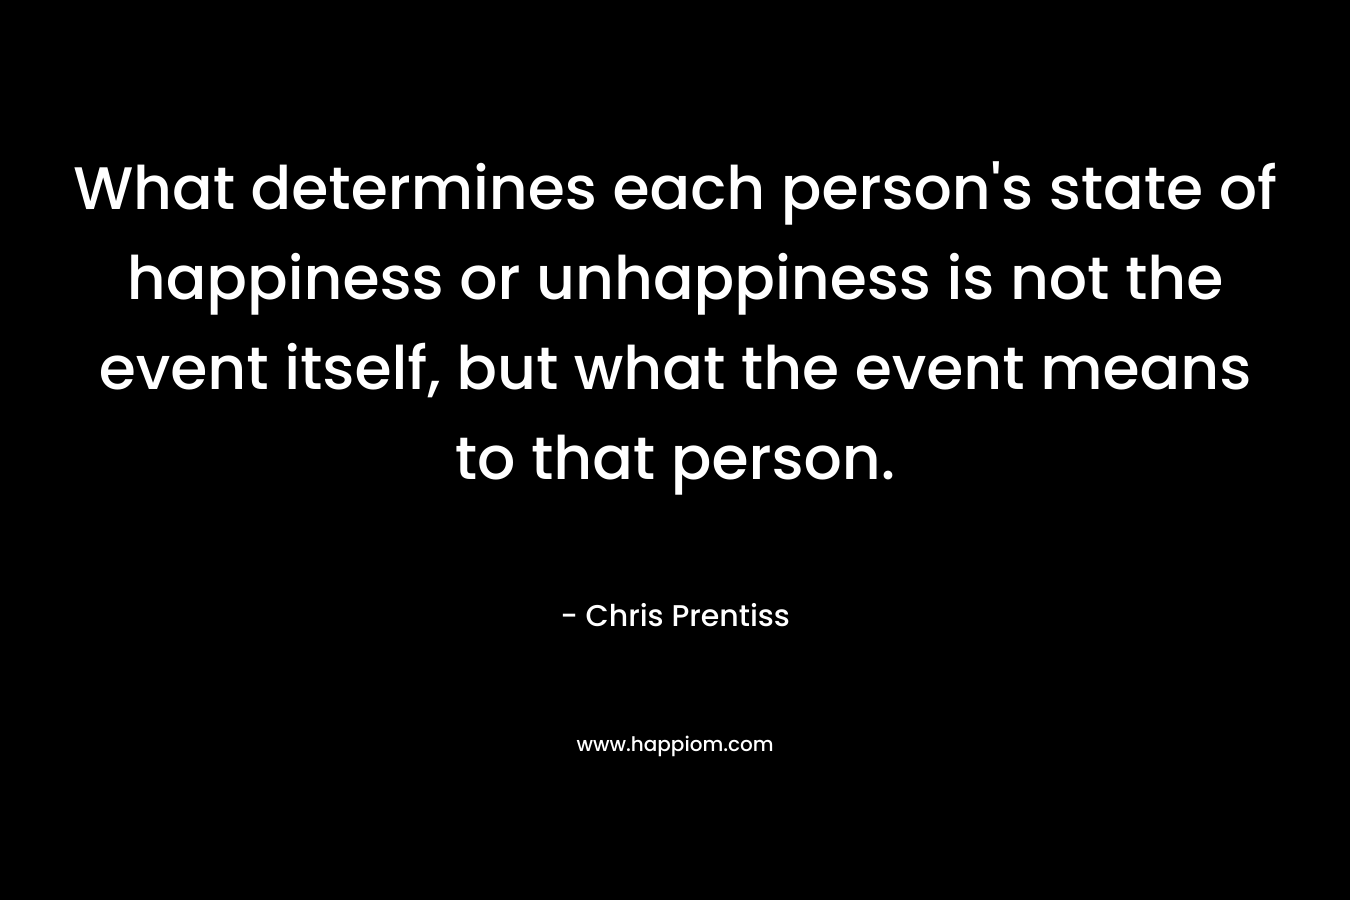 What determines each person’s state of happiness or unhappiness is not the event itself, but what the event means to that person. – Chris Prentiss